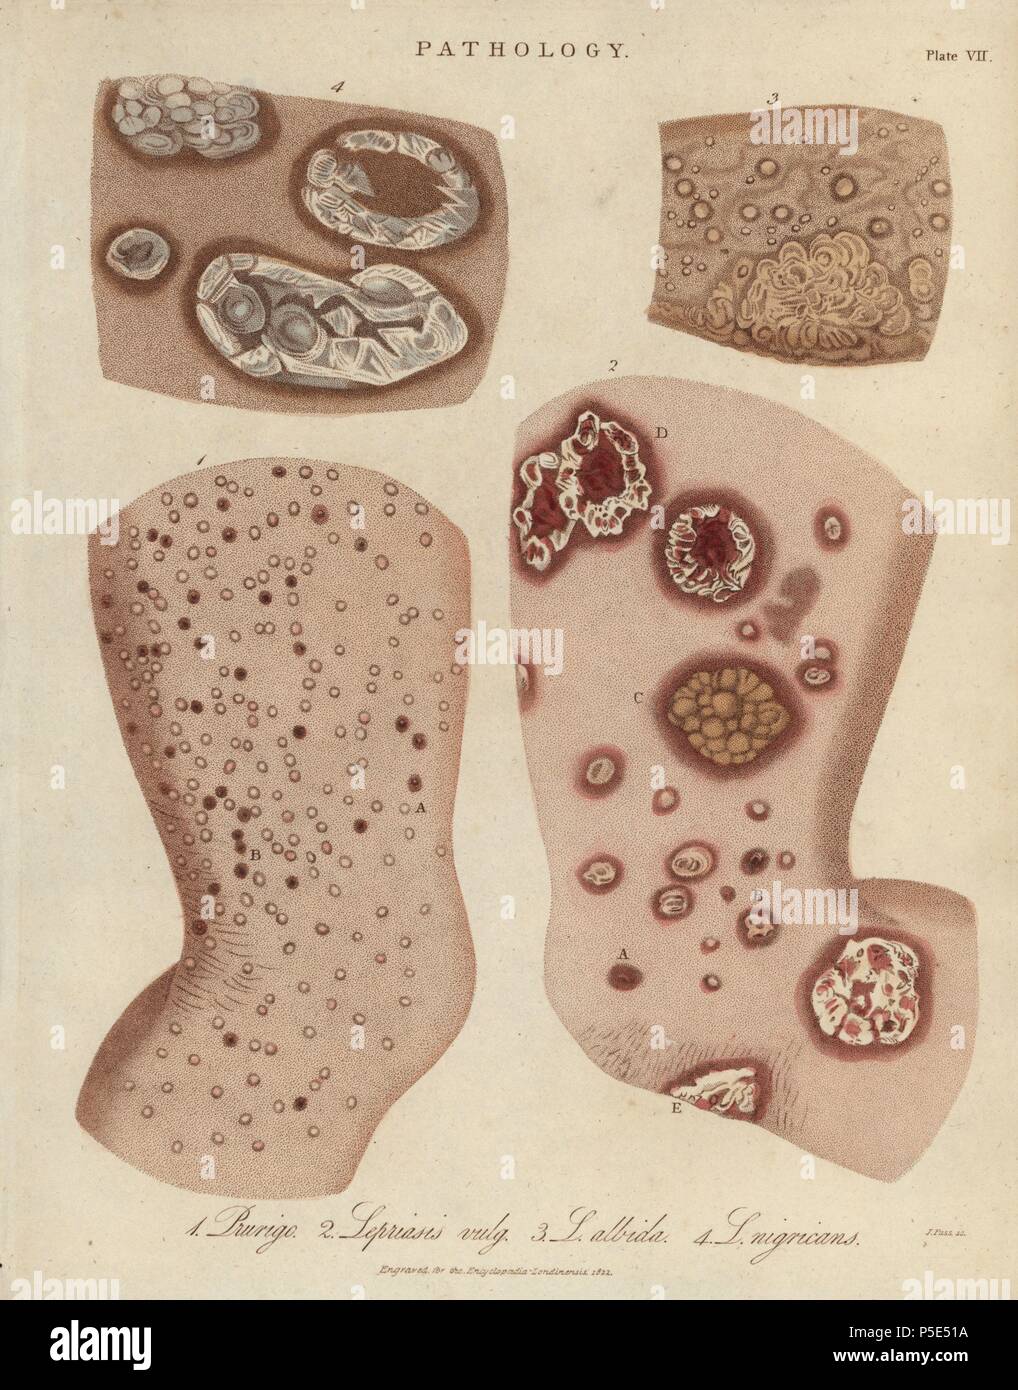 Skin diseases: Prurigo nodularis and Psoriasis varieties. (Lepriasis is an obsolete term for psoriasis and leprosy.) Handcoloured copperplate stipple engraving by John Pass from John Wilkes' 'Encyclopedia Londinensis,' J. Adlard, London, 1822. Stock Photo